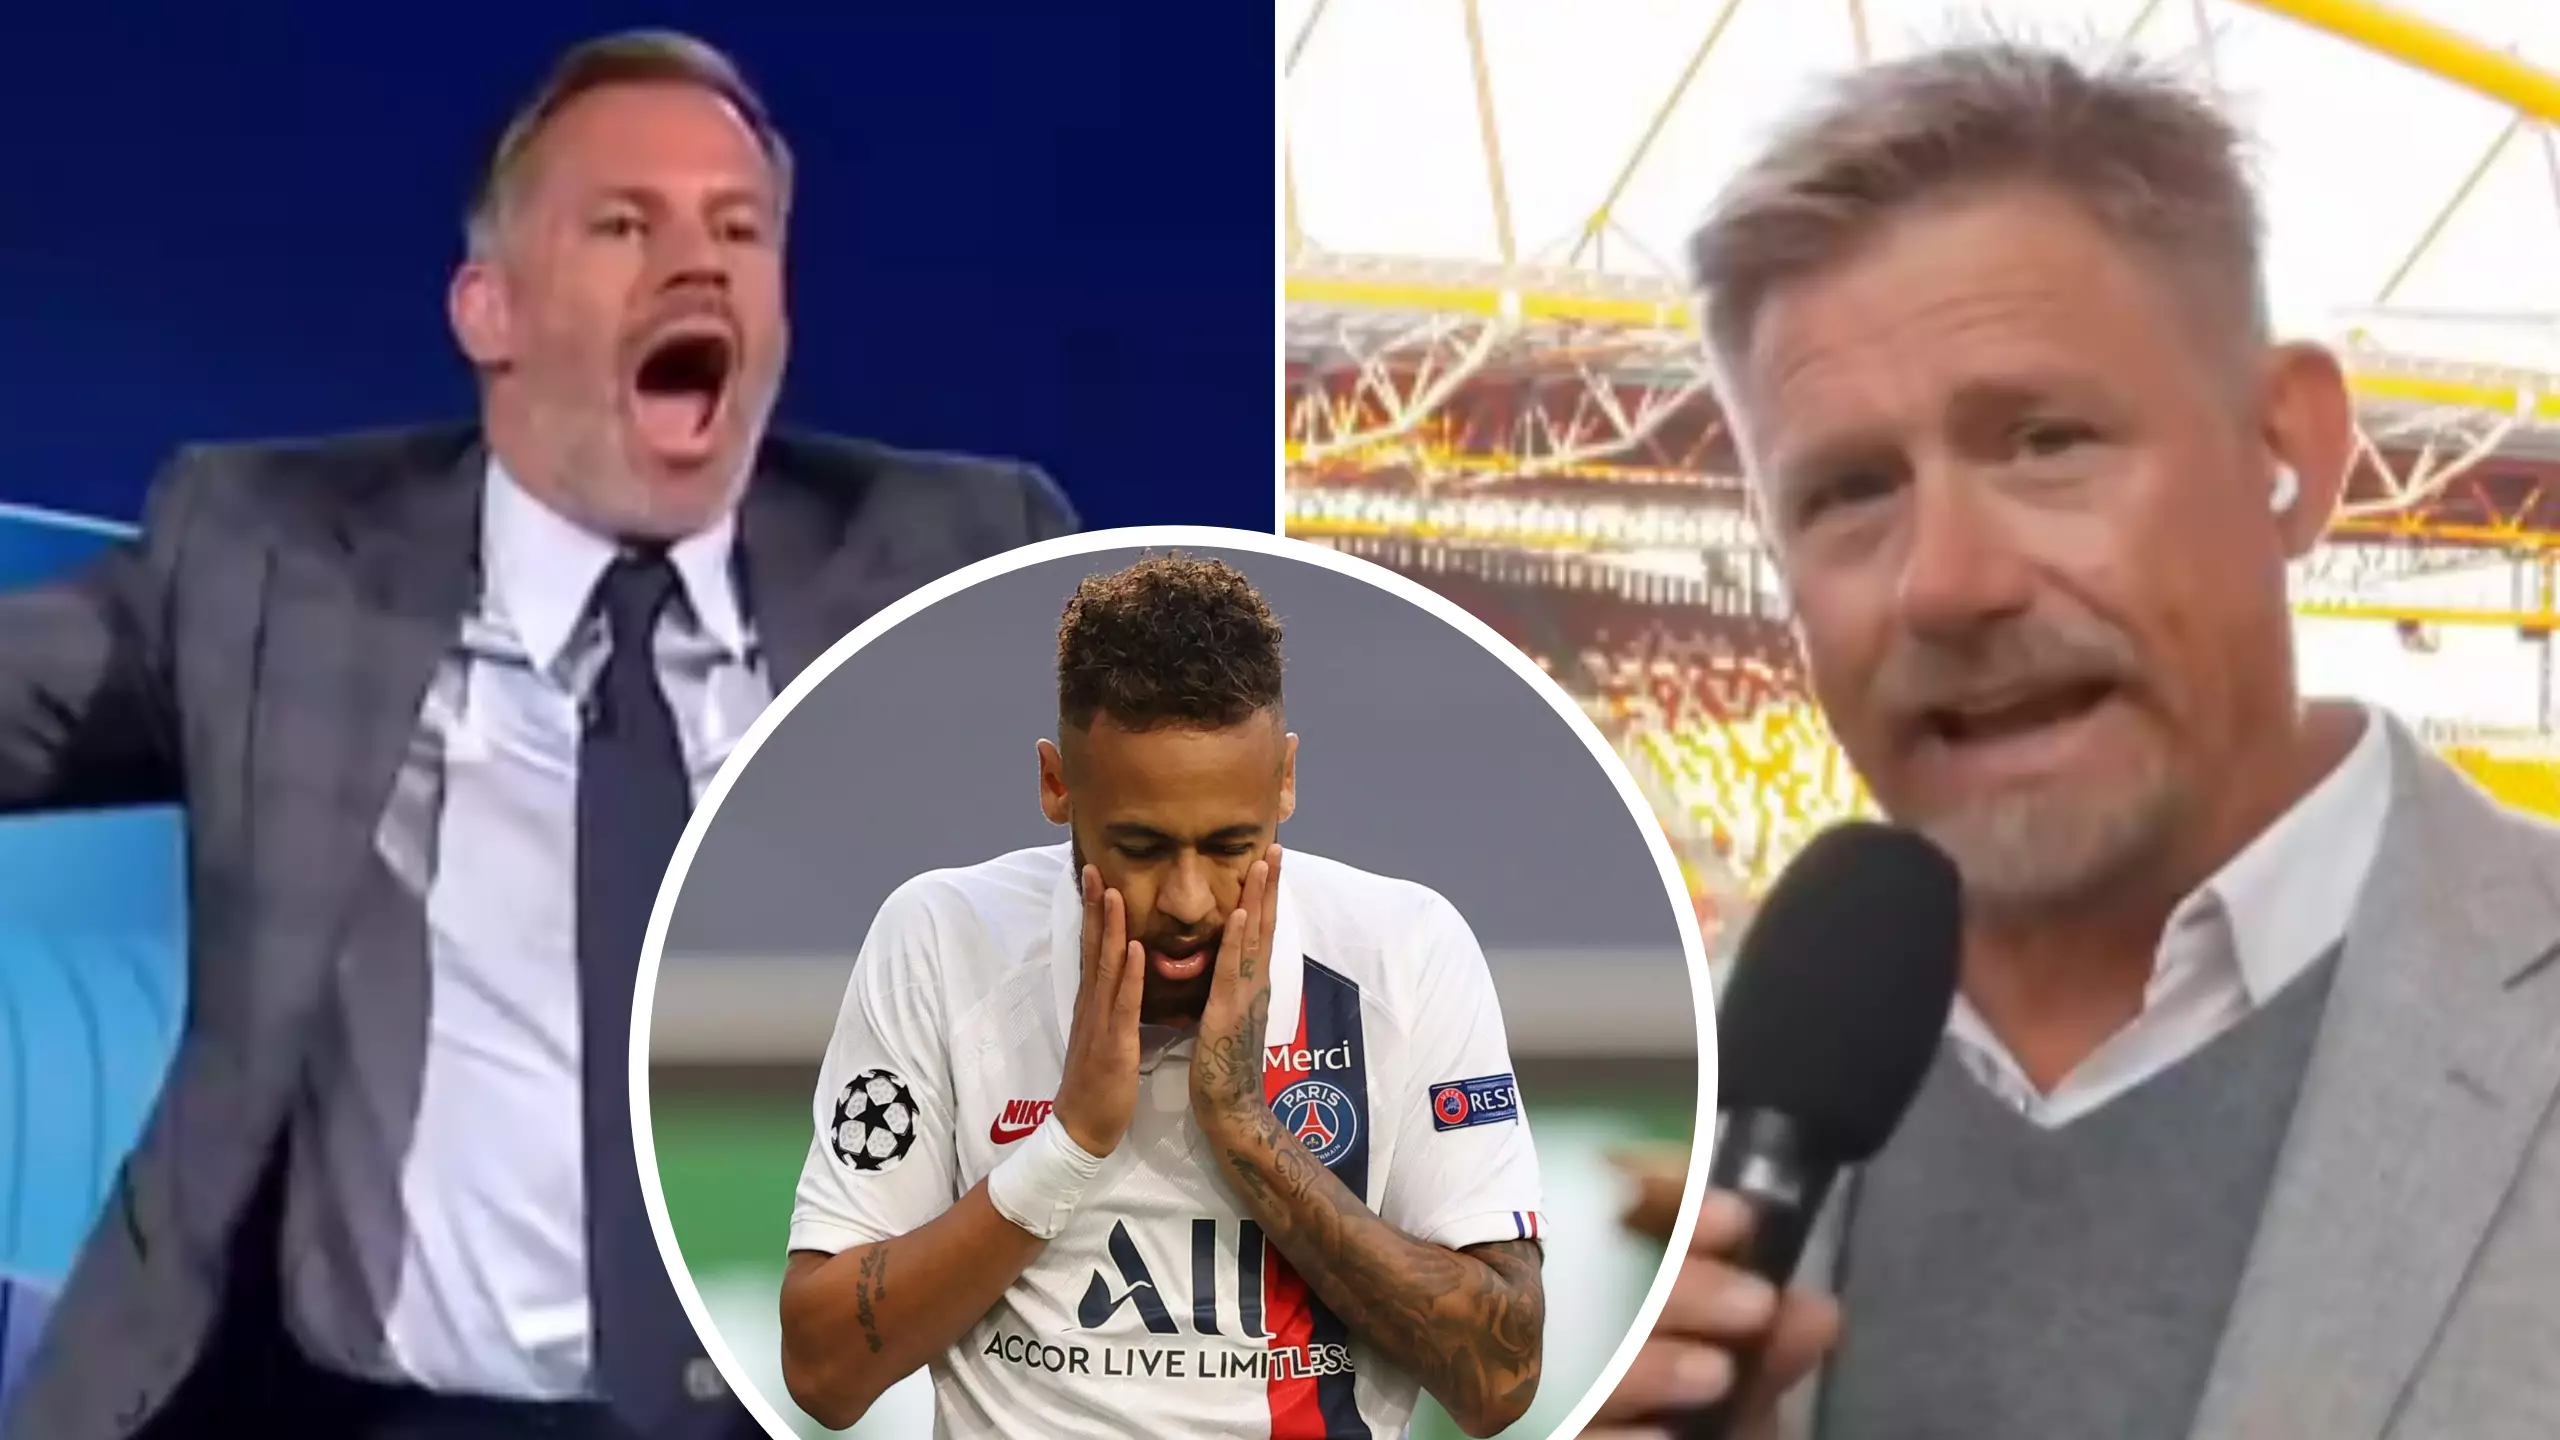 "Stick To Goalkeeping!" - Jamie Carragher And Peter Schmeichel Involved In Intense Live Debate Over Neymar